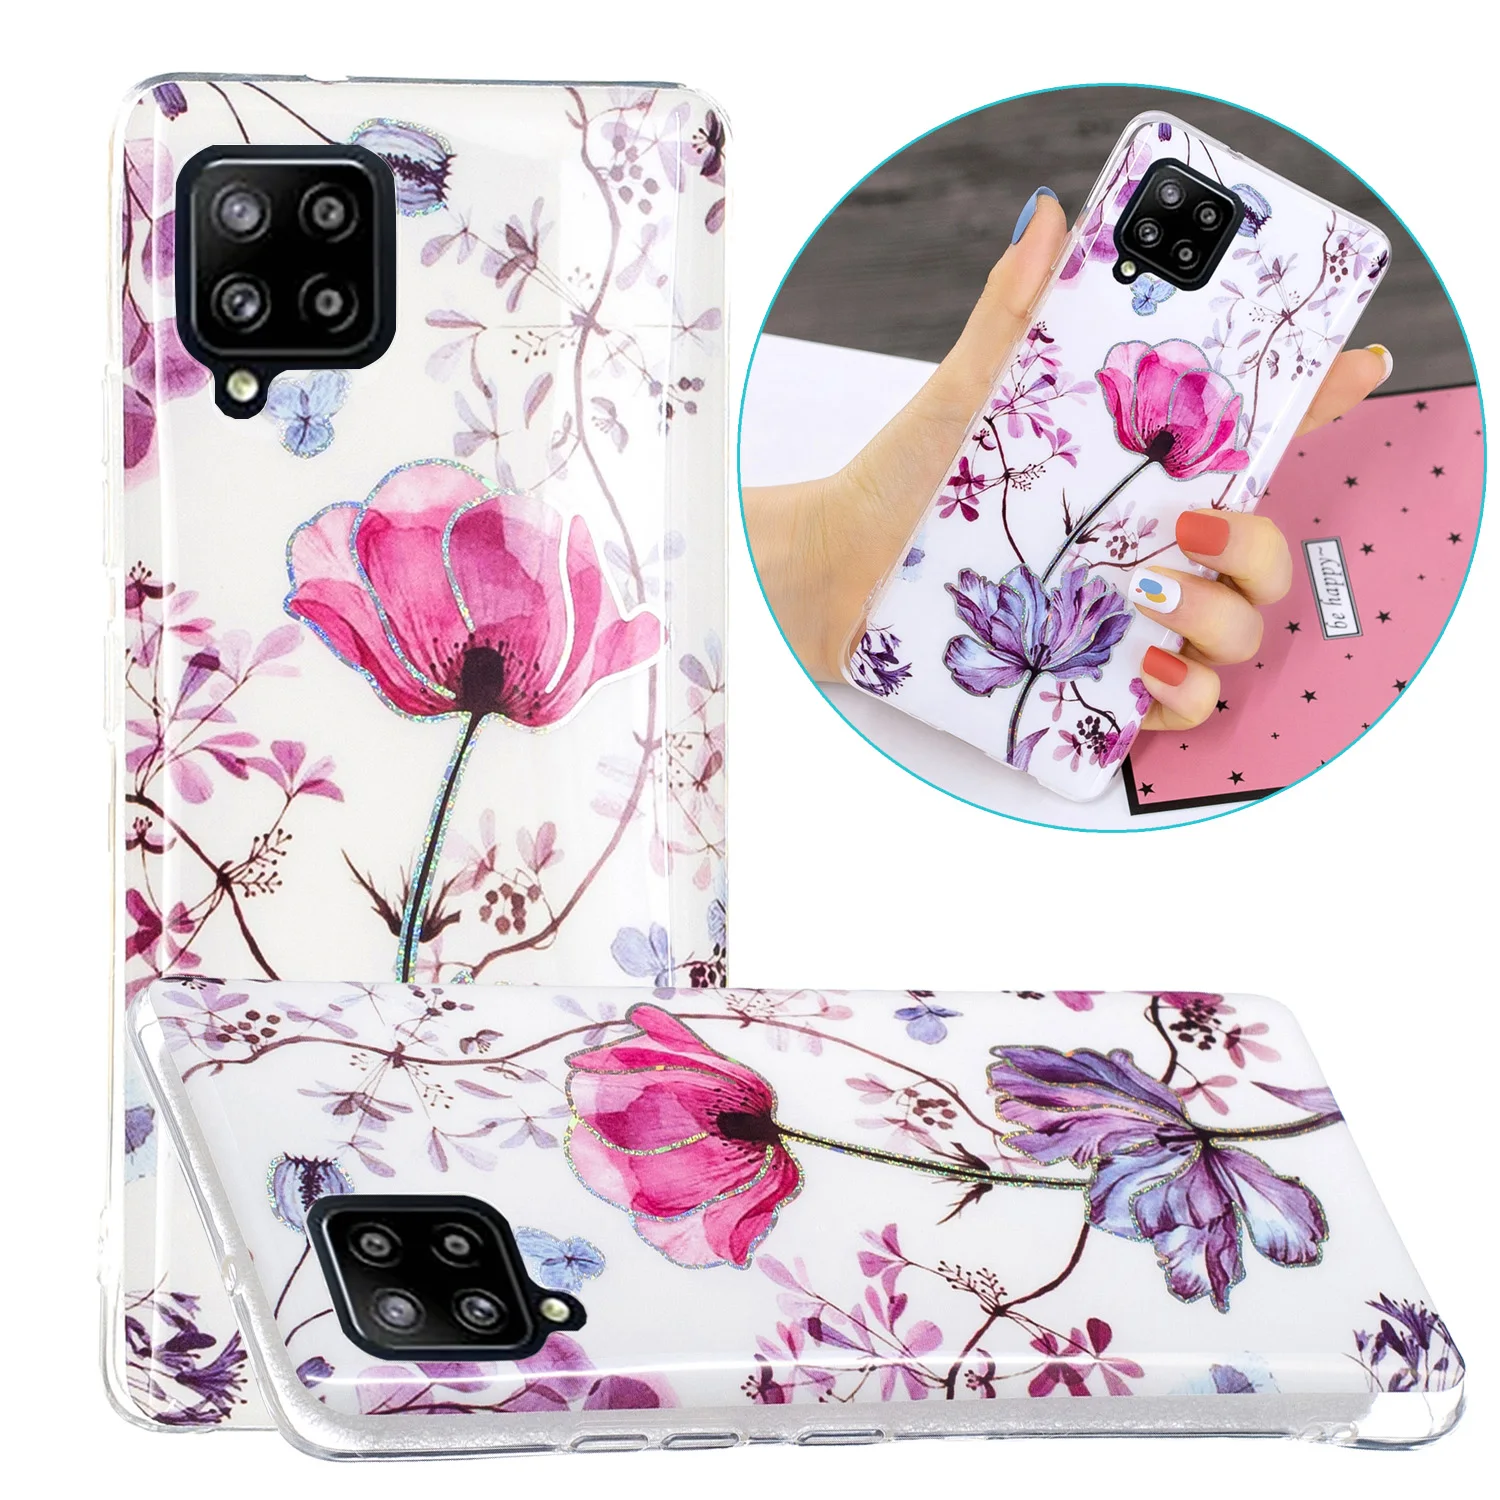 

Soft plum blossom Tpu Marble Love Patten Phone Cases For Samsung Galaxy A42 Case Cover Capa